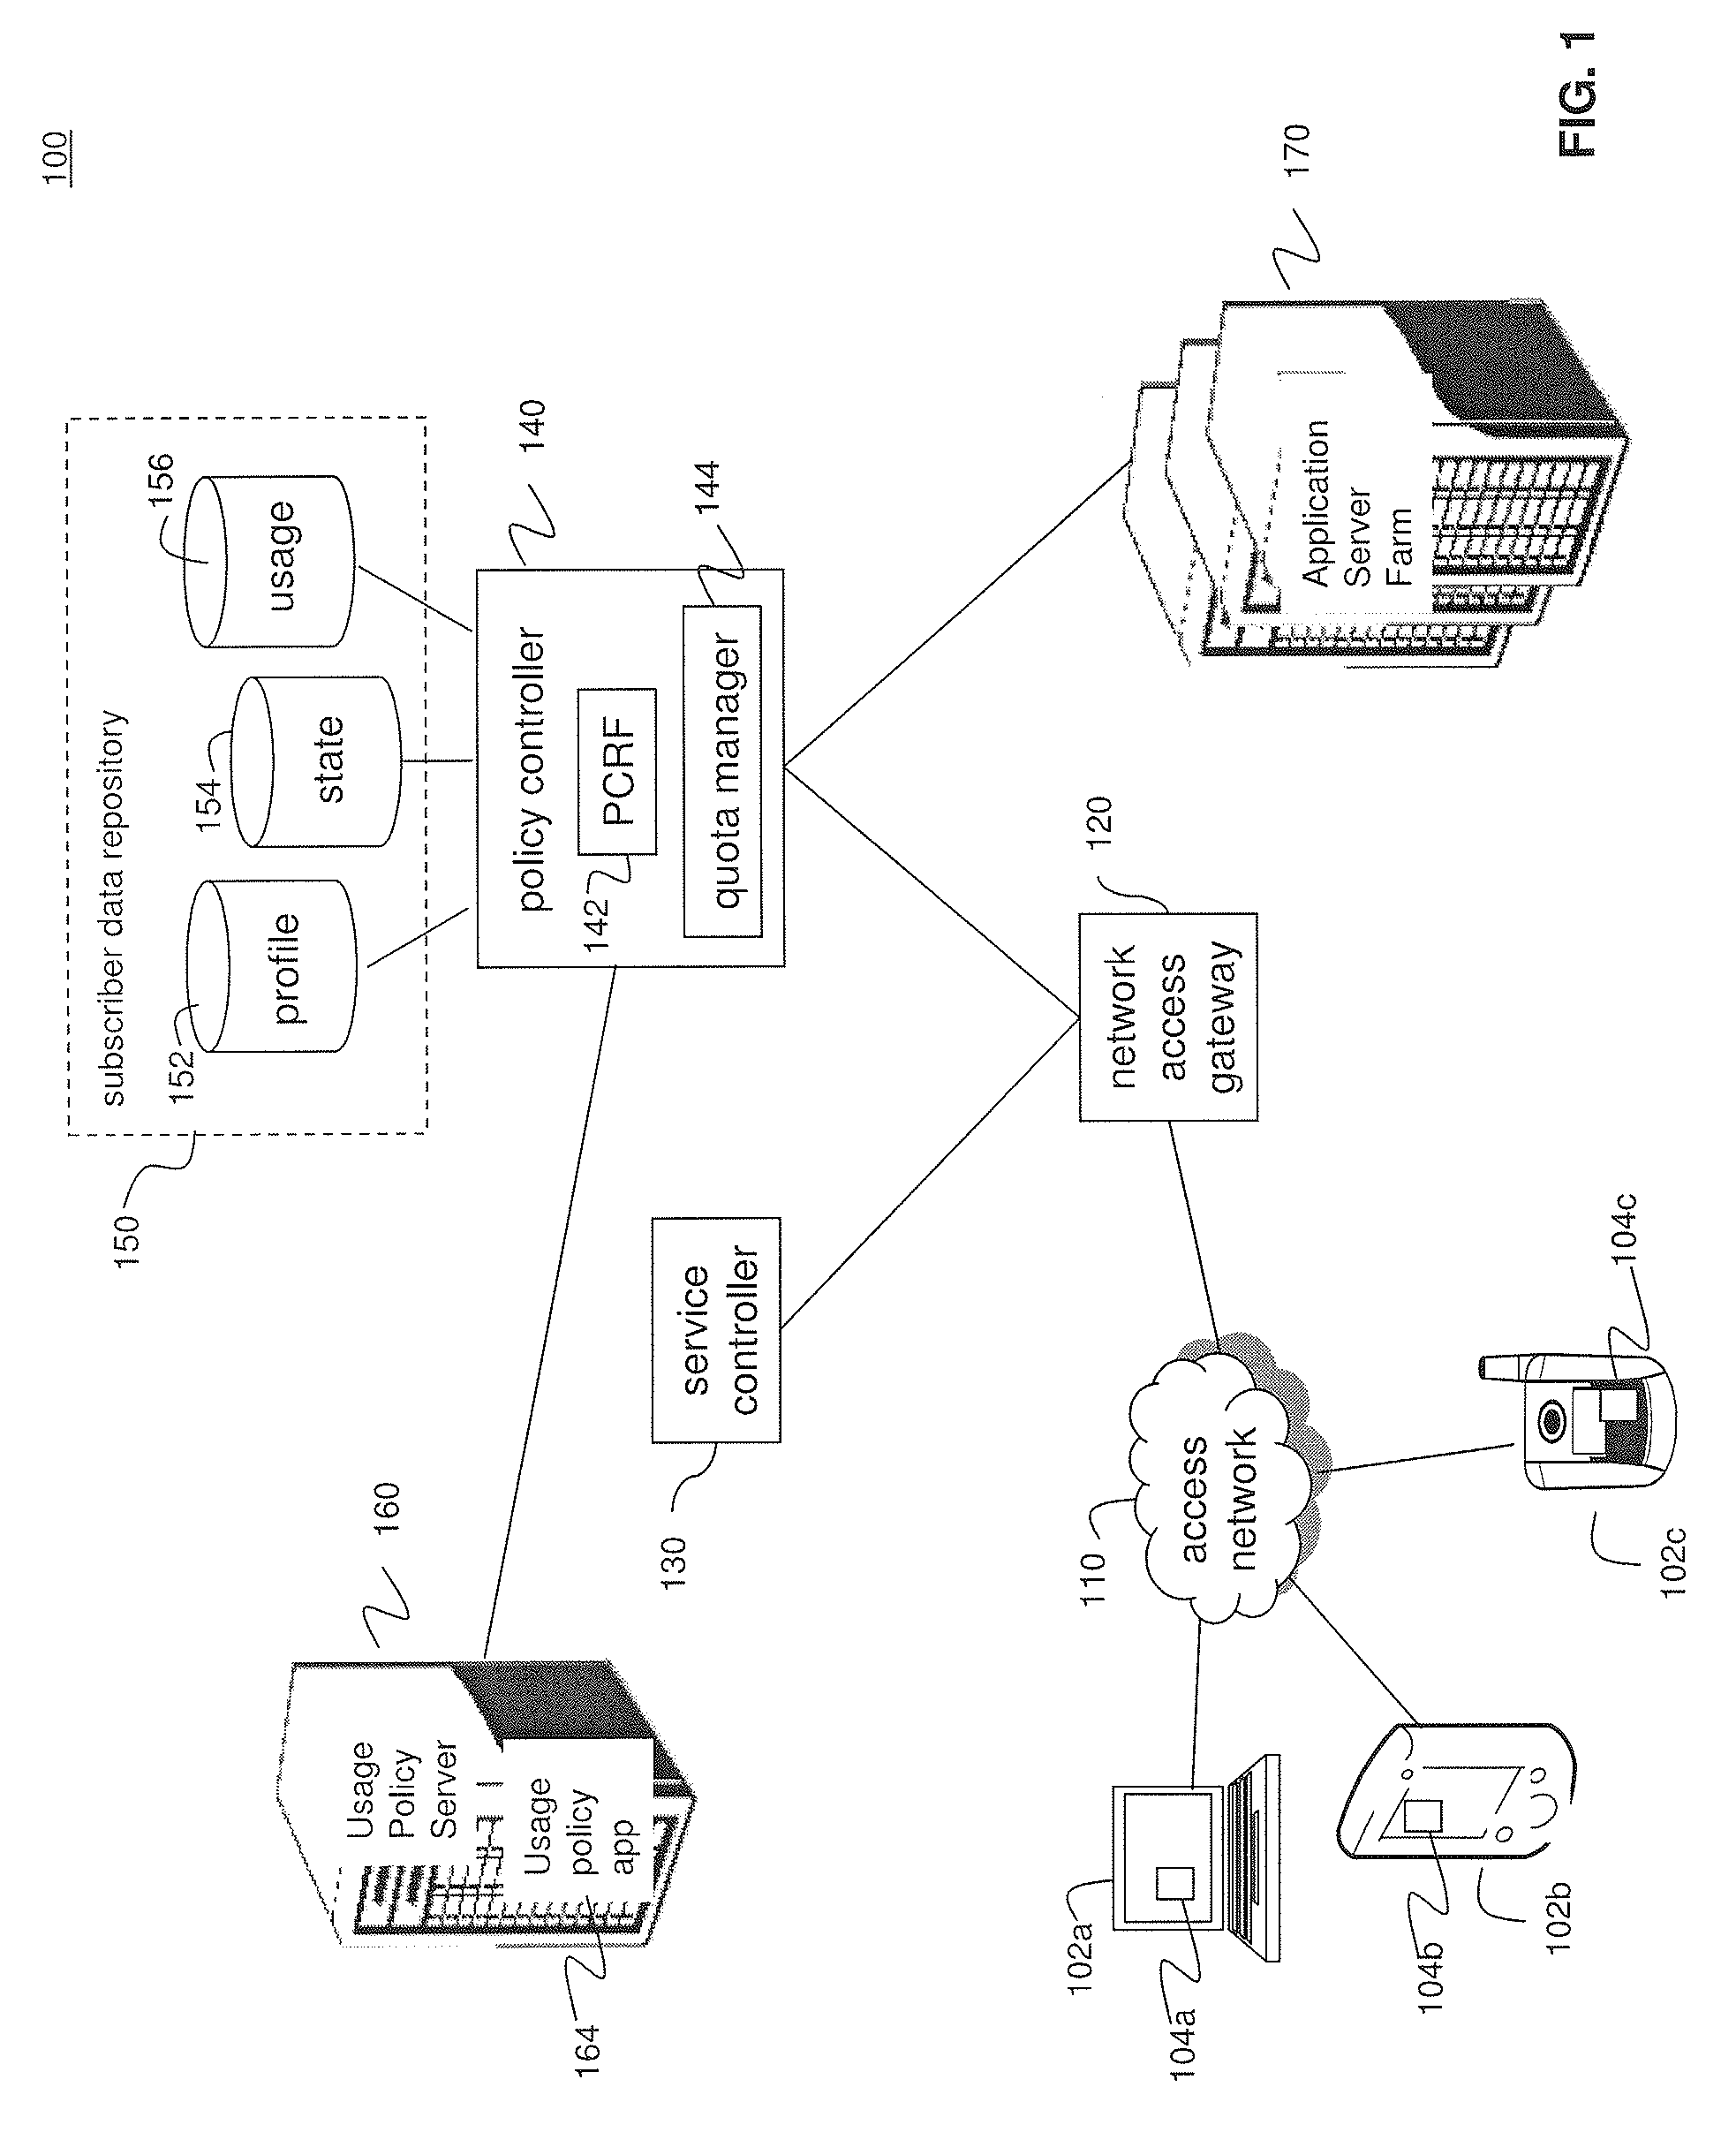 System and methods for user-centric mobile device-based data communications cost monitoring and control